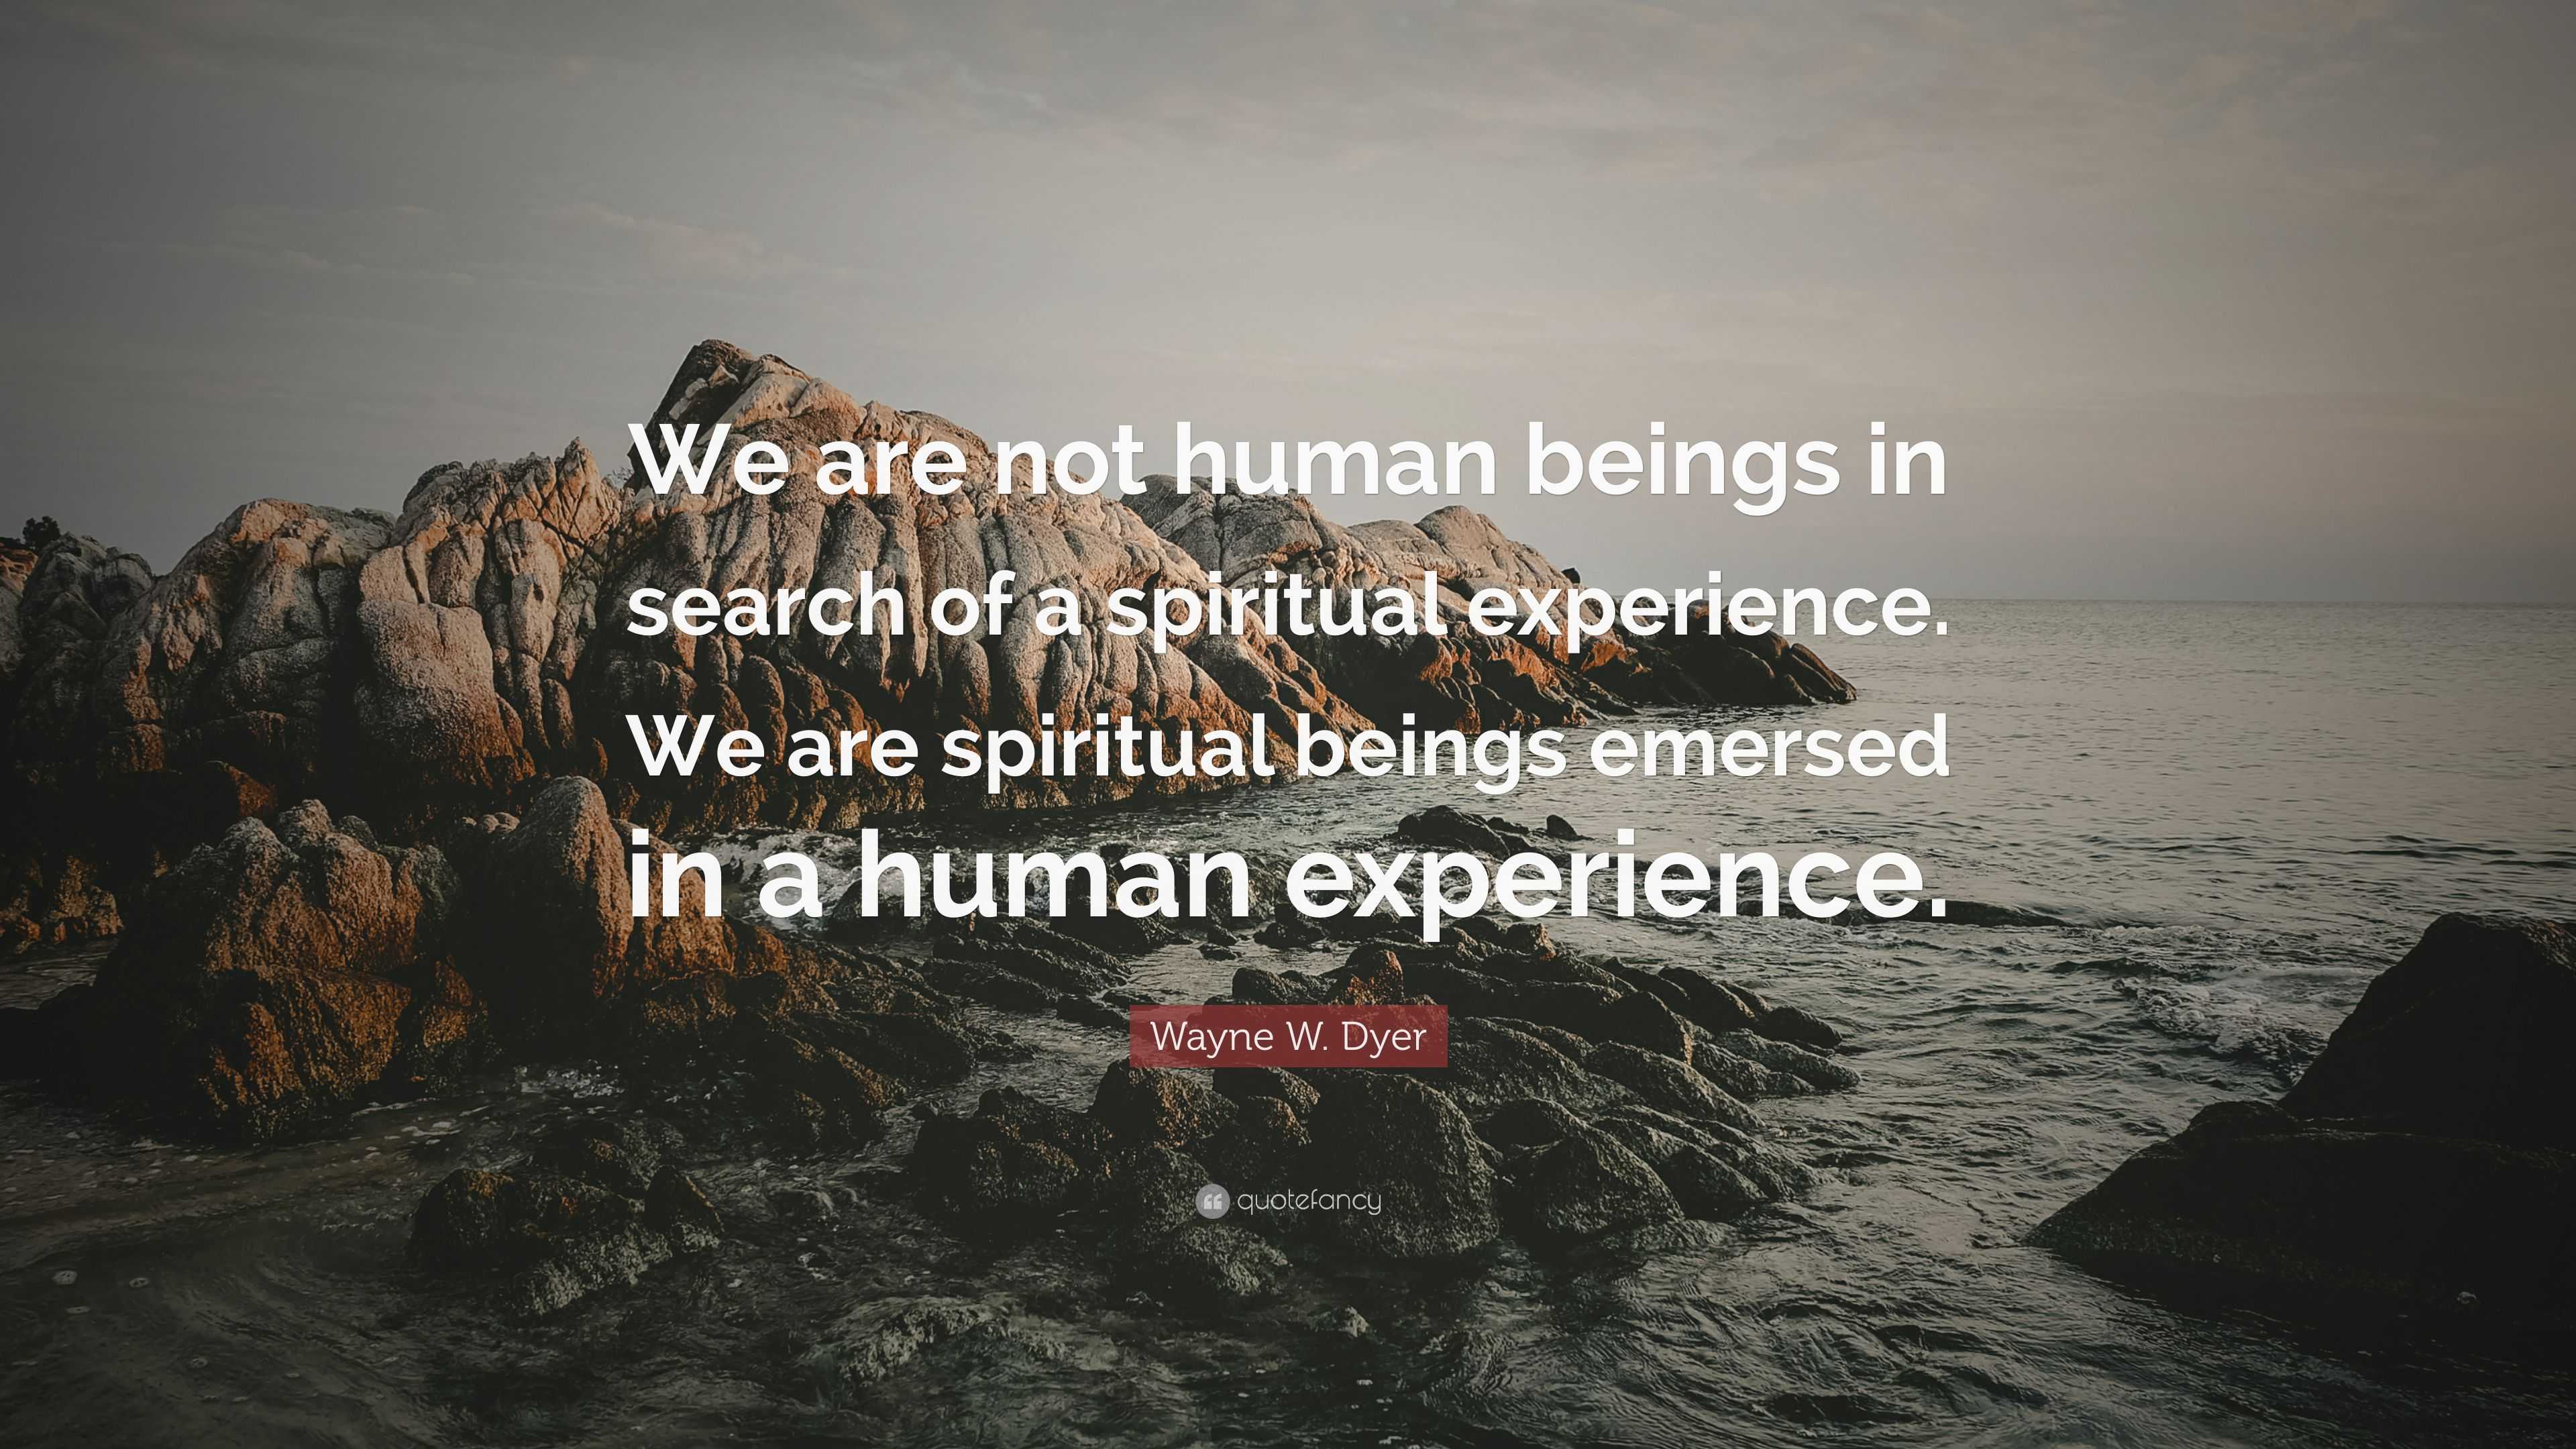 Wayne W. Dyer Quote: “We are not human beings in search of a spiritual ...